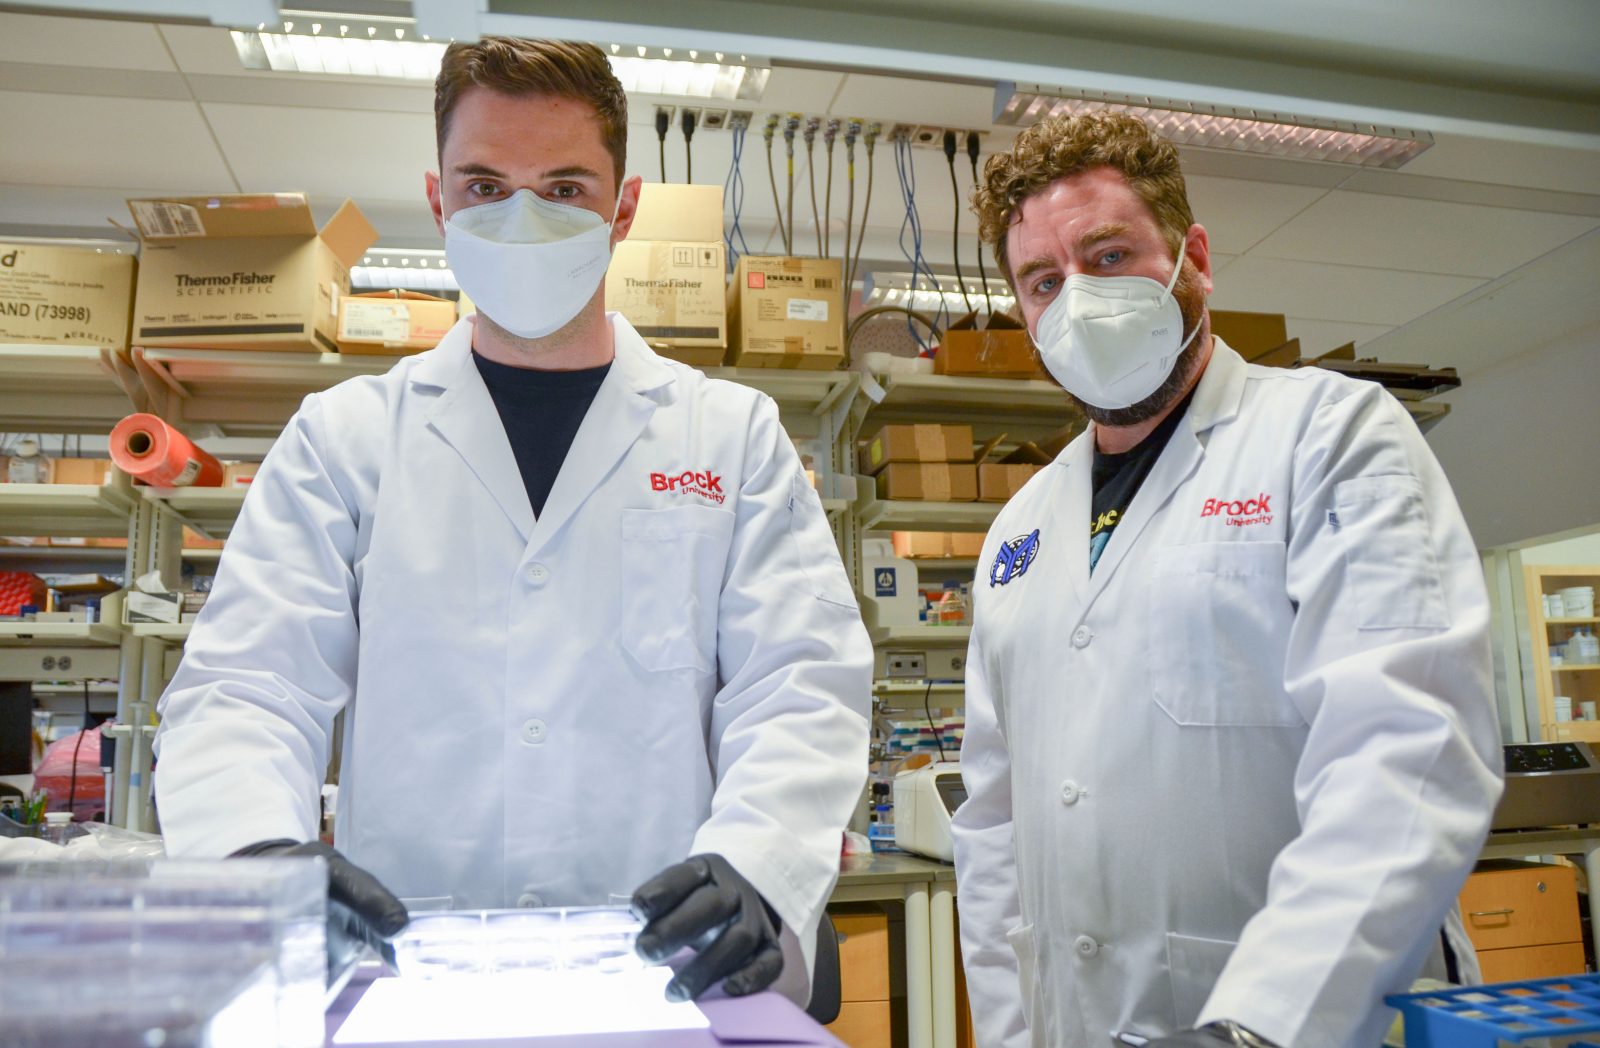 Waist-up photo of PhD student Jeremia Coish (left) and Associate Professor of Health Sciences Adam MacNeil (right) in the lab with boxes and shelves in the background. Both are wearing white Brock University lab coats, white masks and black shirts.